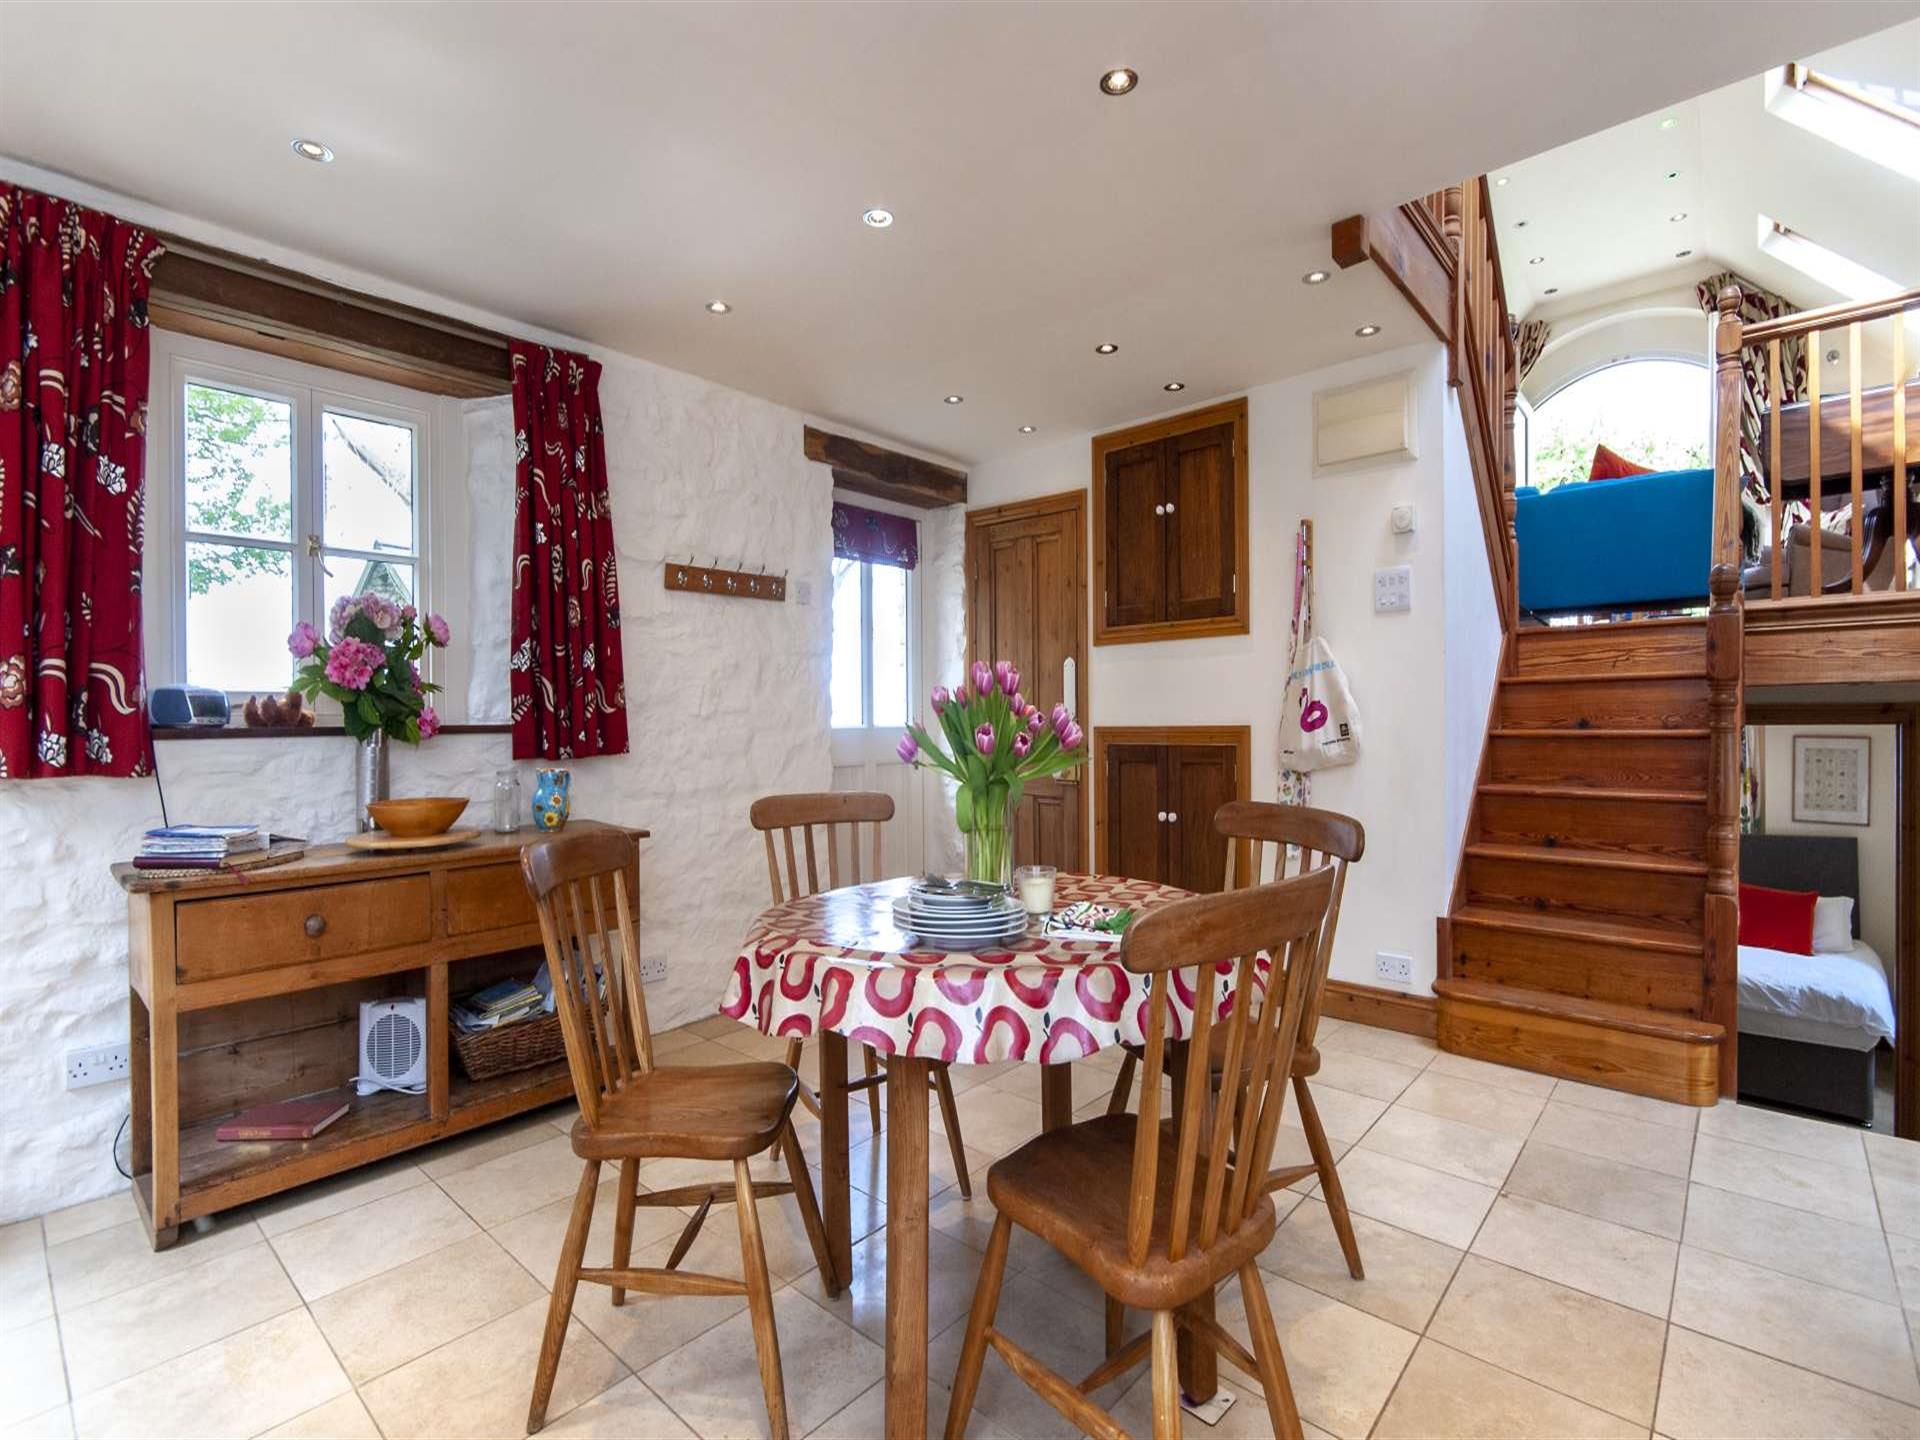 Self catering Newport Pembrokeshire - cottage with